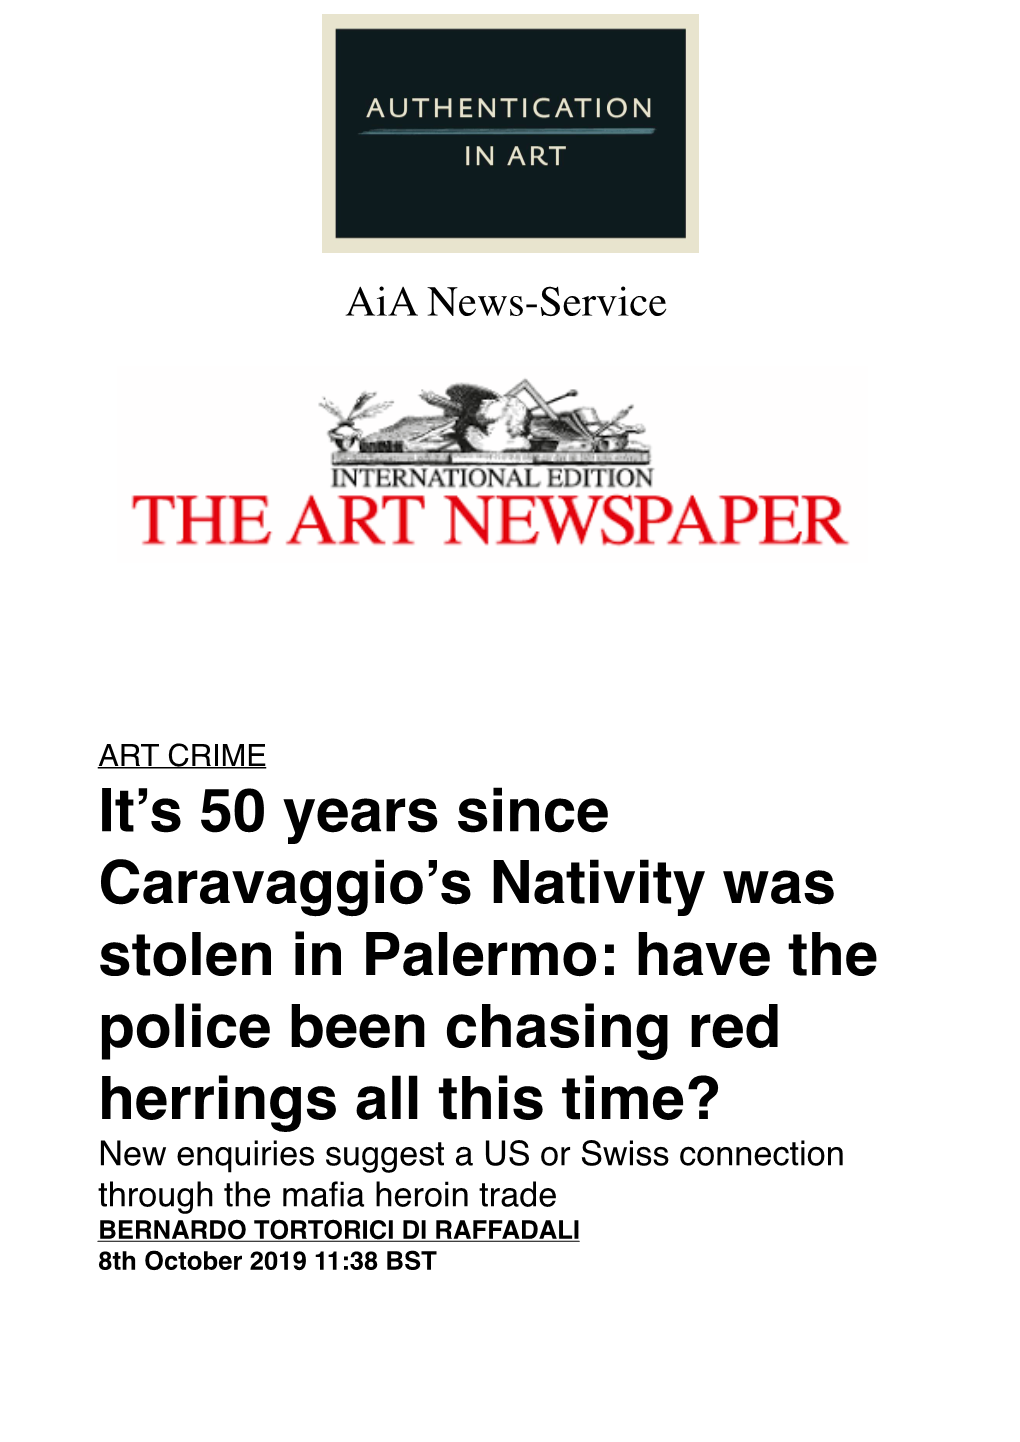 It's 50 Years Since Caravaggio's Nativity Was Stolen in Palermo- Have